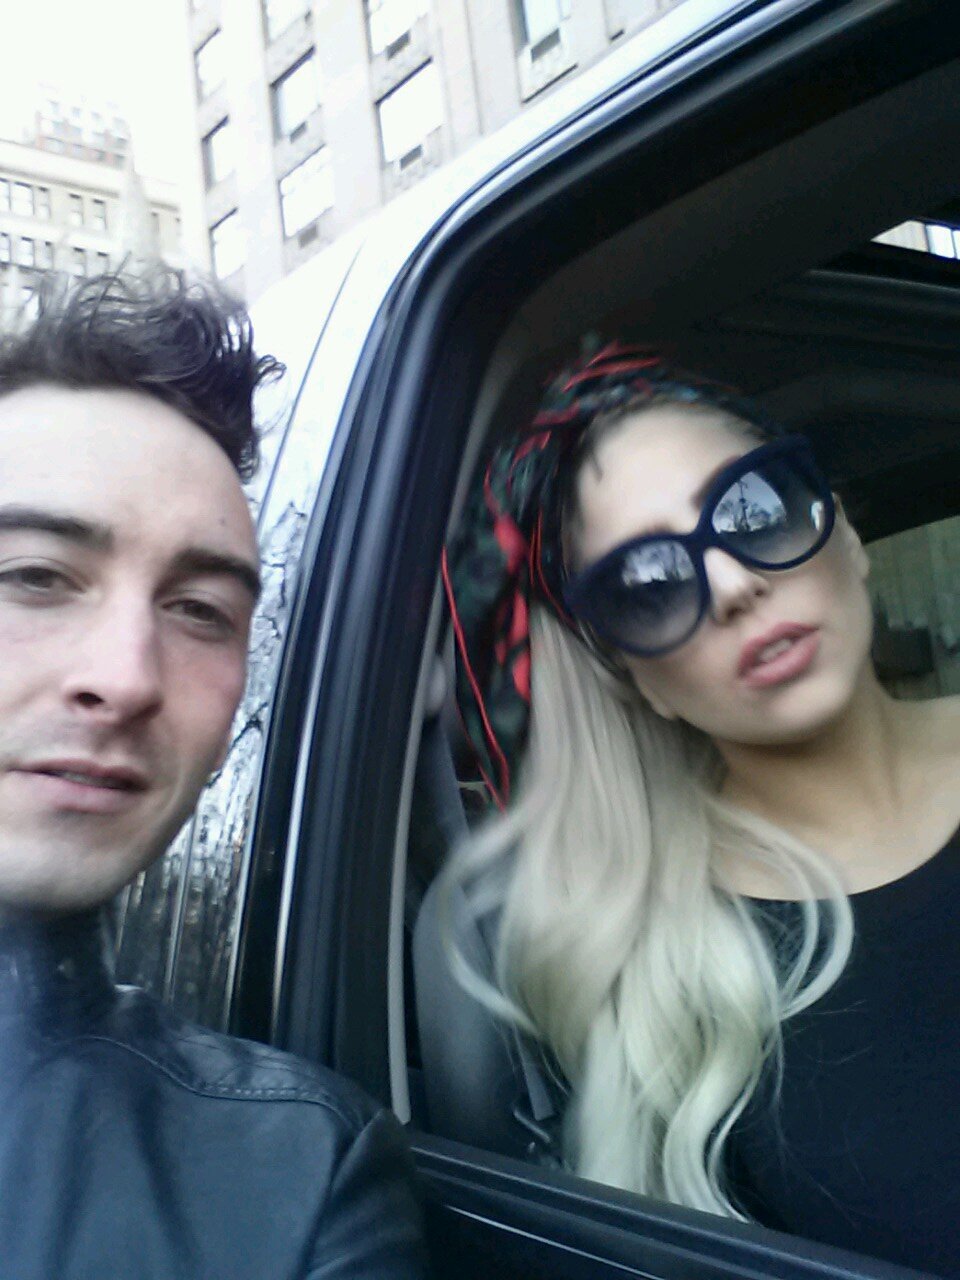 #StupidLove #LG6 #CHROMATICA 
Verified Mons†er, hoping @ladygaga Follows Me! MET GAGA AT A RED LIGHT IN NYC 4/5/14 🤩